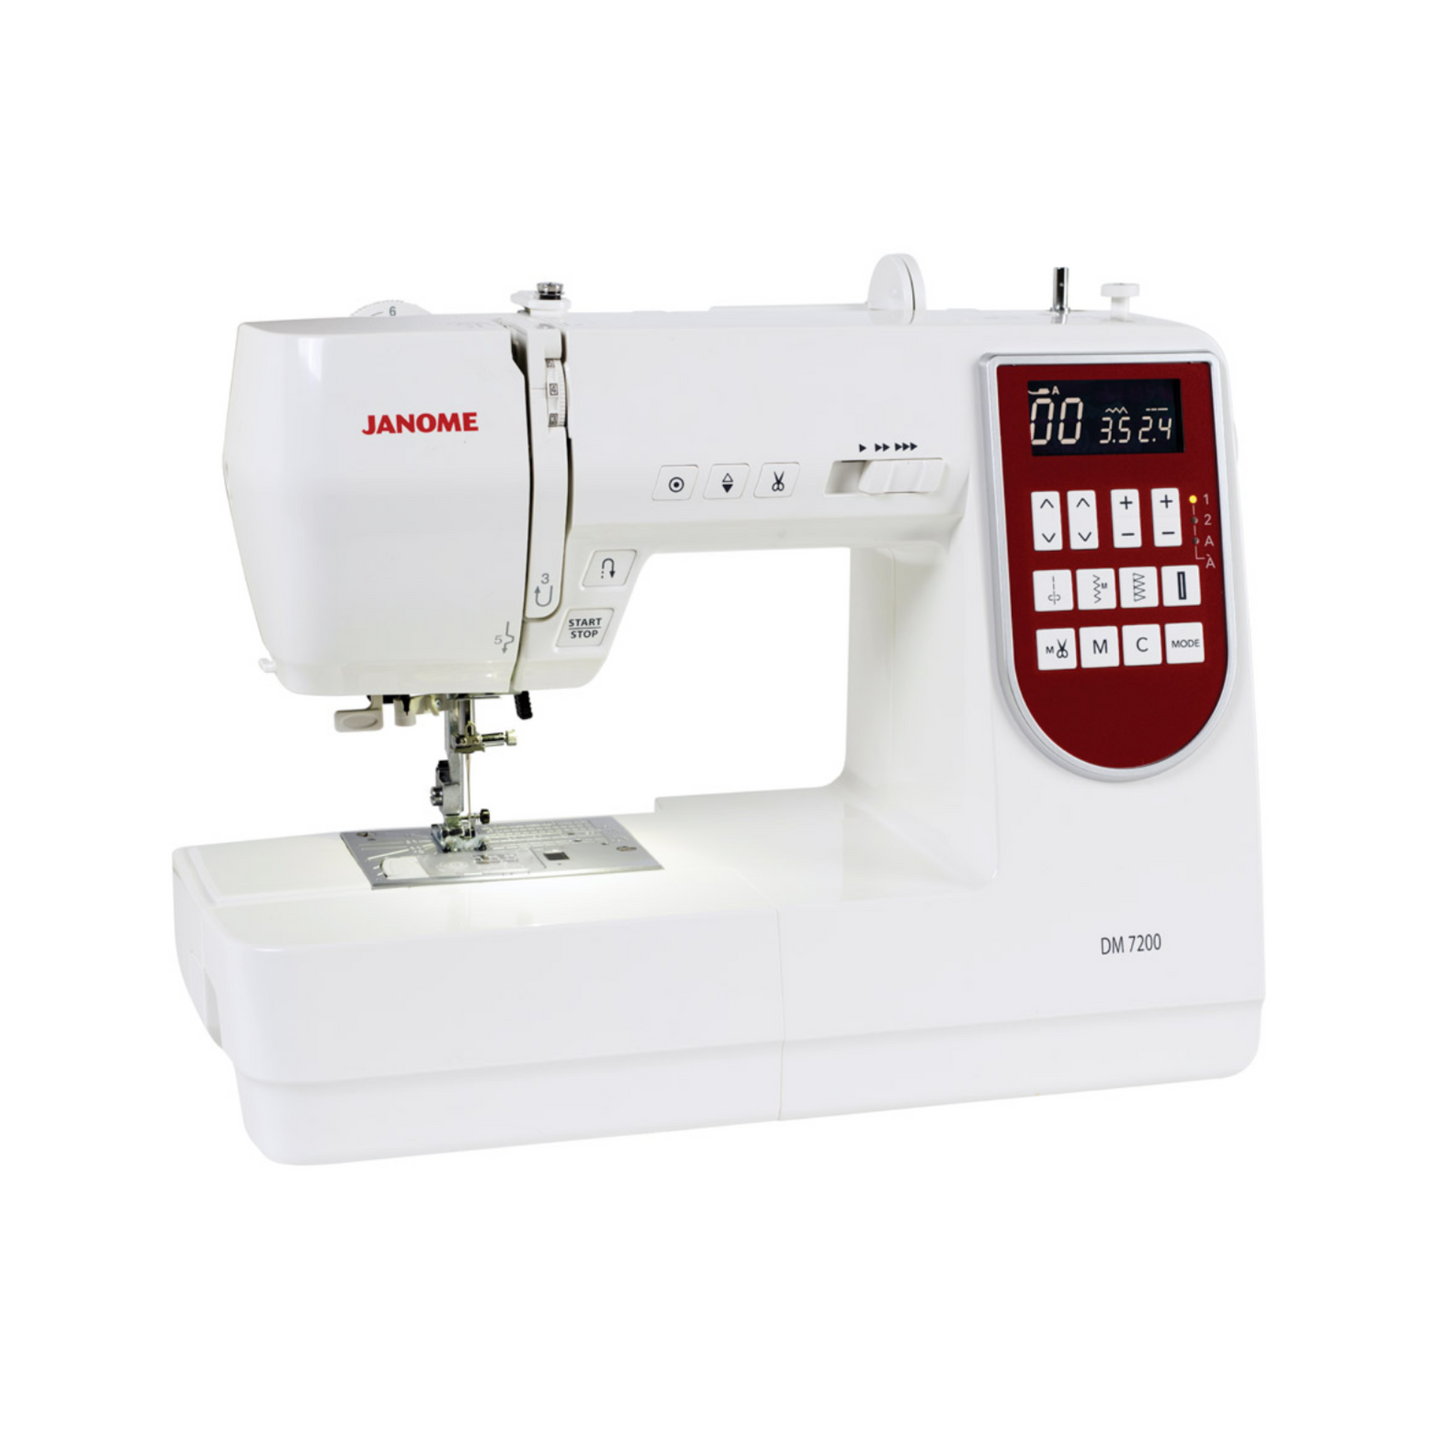 Janome DM7200 - Sewing machine - White - Front view